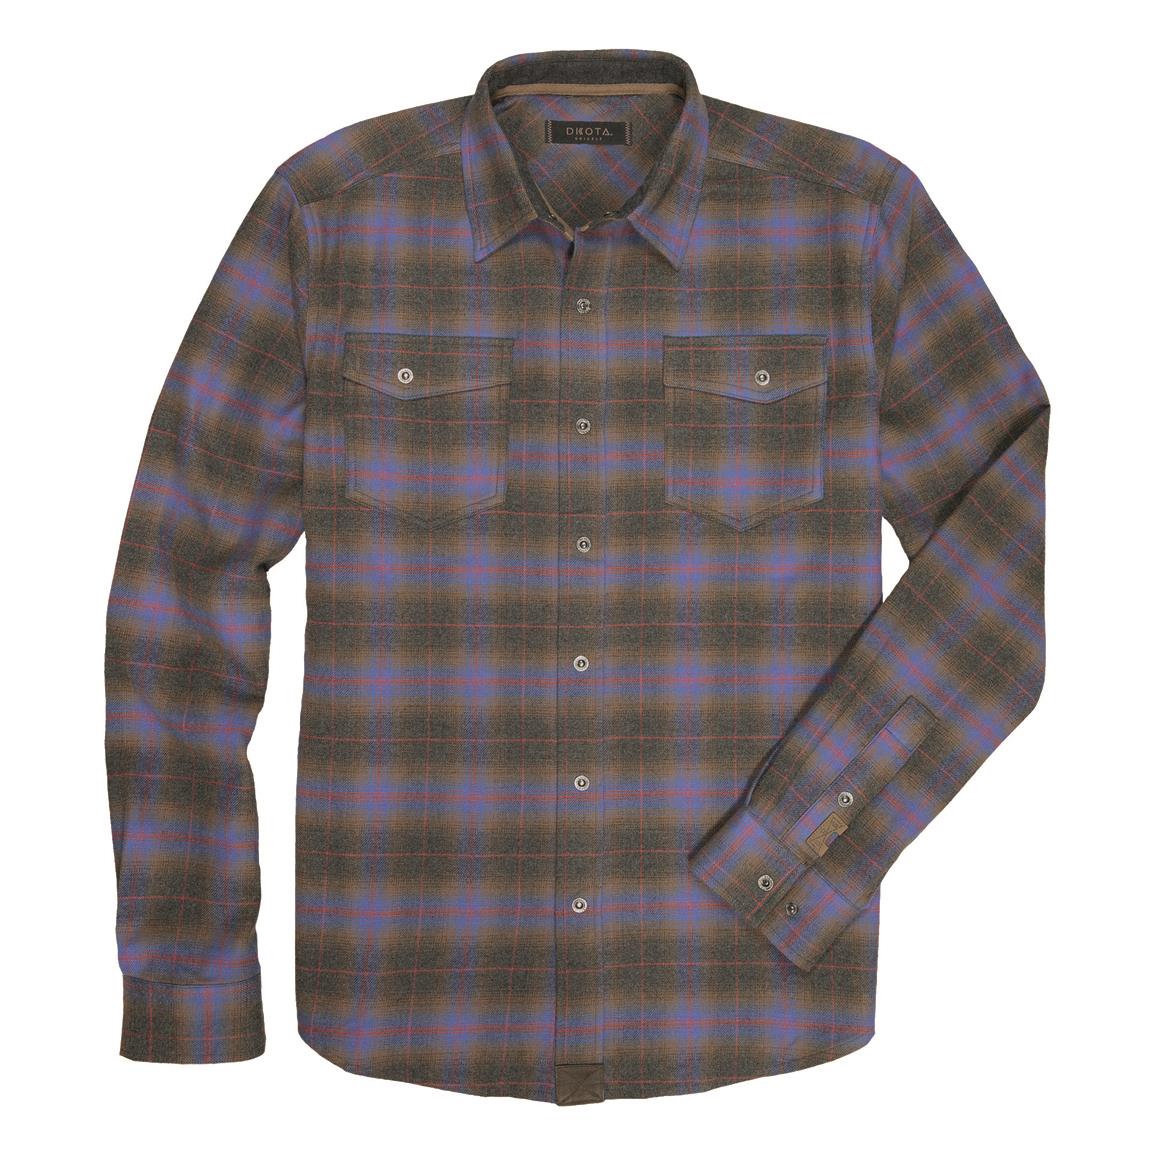 DKOTA GRIZZLY Men's Riley Flannel Shirt, Trench